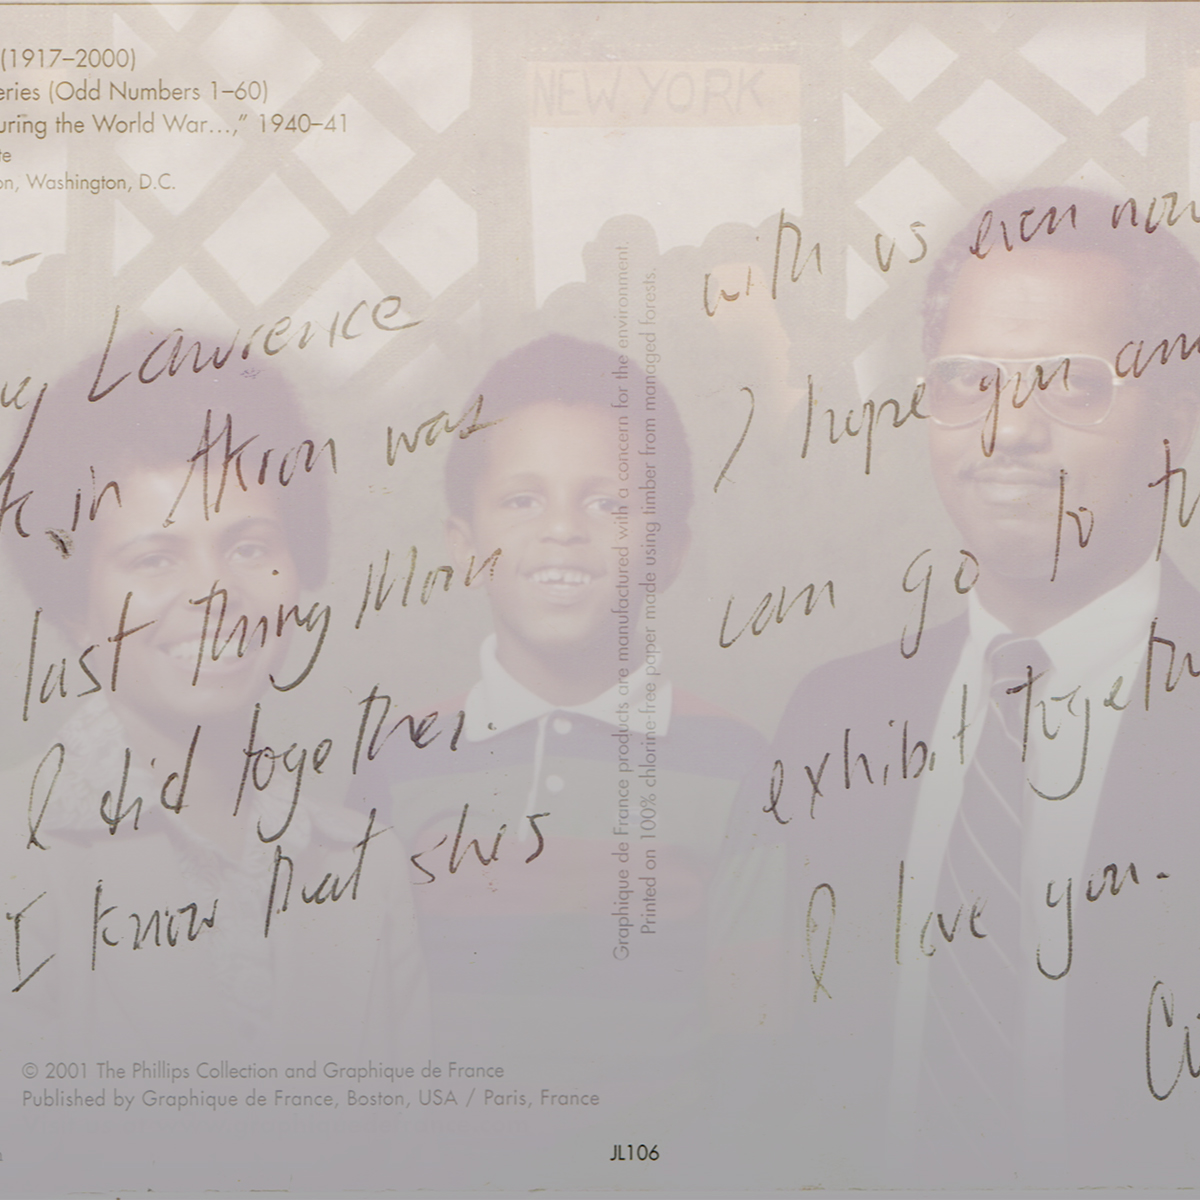 This image is a multiple exposure of three images: 1) the backside of a postcard from the Phillips Collection (Washington, DC) that Cosby Hunt sent to his father; 2) a family portrait of a young Cosby in-between his parents, Betty & Ike; and 3) Panel No. 1 of The Migration Series by Jacob Lawrence. Written on the postcard is a note from Cosby to his father. The note references the last thing he did with his mother: Seeing Jacob Lawrence speak in Akron, OH. Cosby closes by expressing his desire to see The Migration Series exhibition with his father.